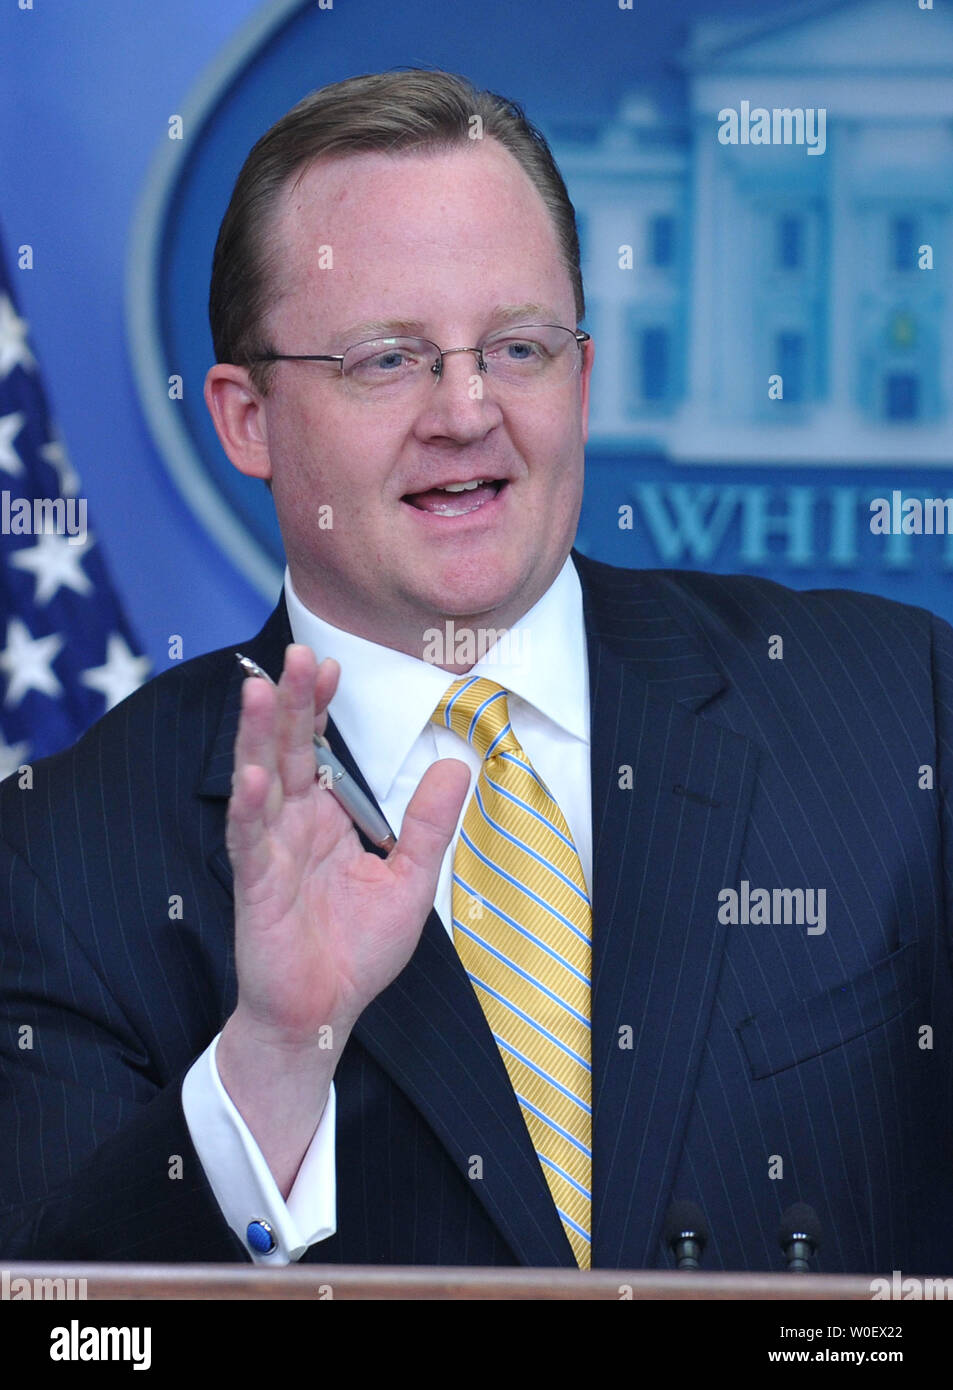 White House Press Secretary Robert Gibbs speaks about the swine influenza during his daily press briefing at the White House in Washington on April 27, 2009. (UPI Photo/Kevin Dietsch) Stock Photo